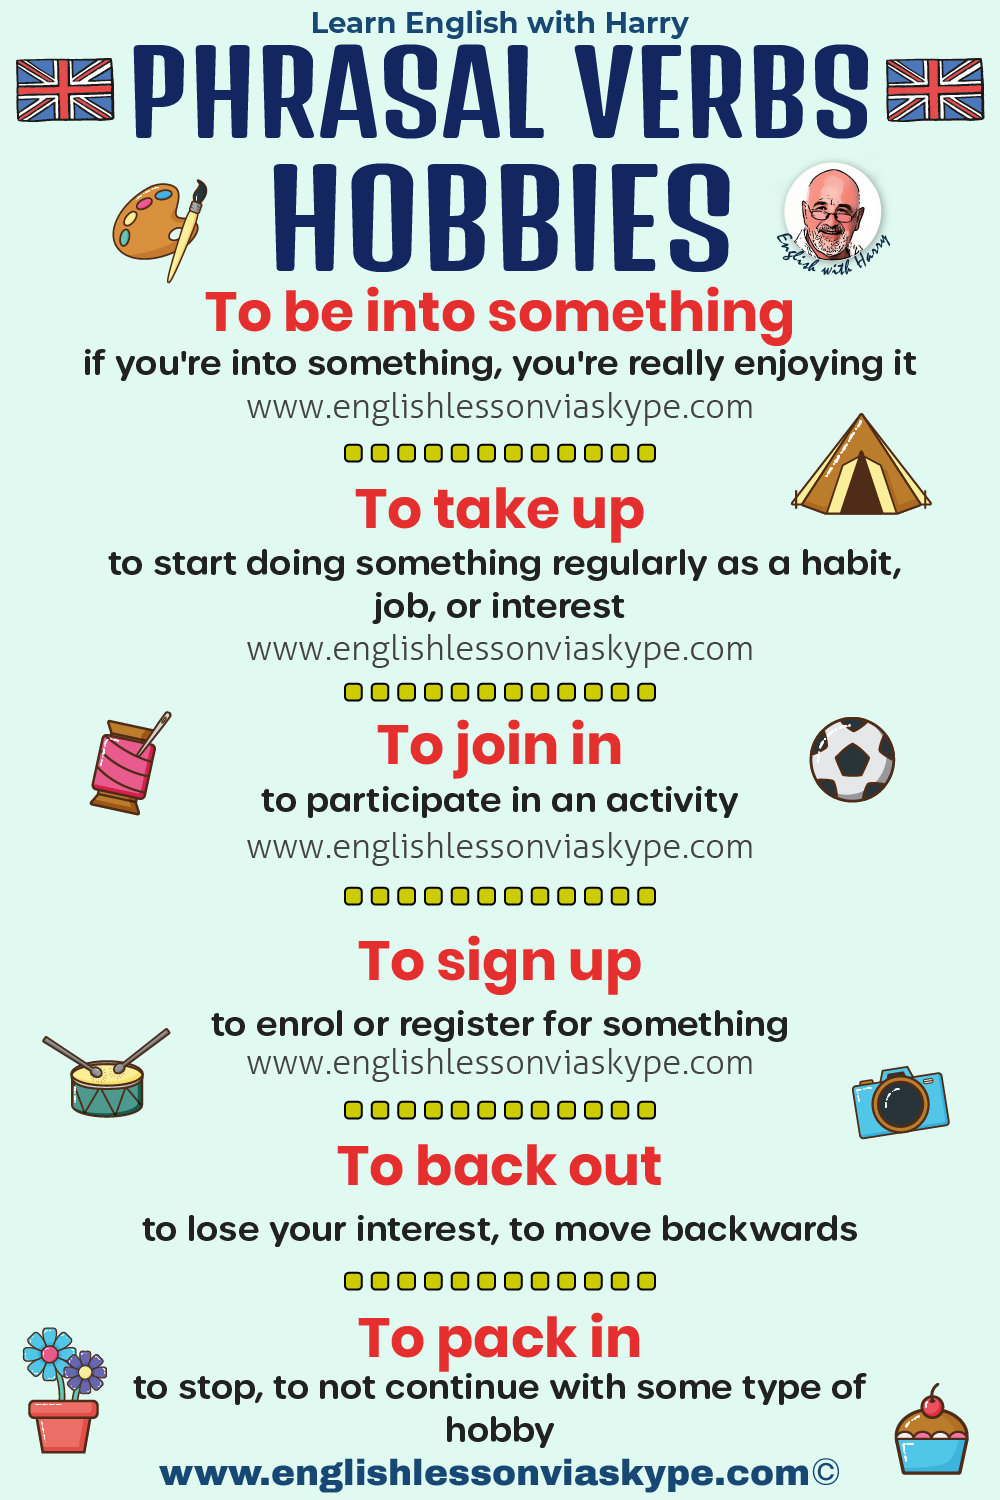 Phrasal verbs for hobbies and activities. Advanced English learning. English lessons on Zoom at www.englishlessonviaskype.com #learnenglish #englishlessons #EnglishTeacher #vocabulary #ingles